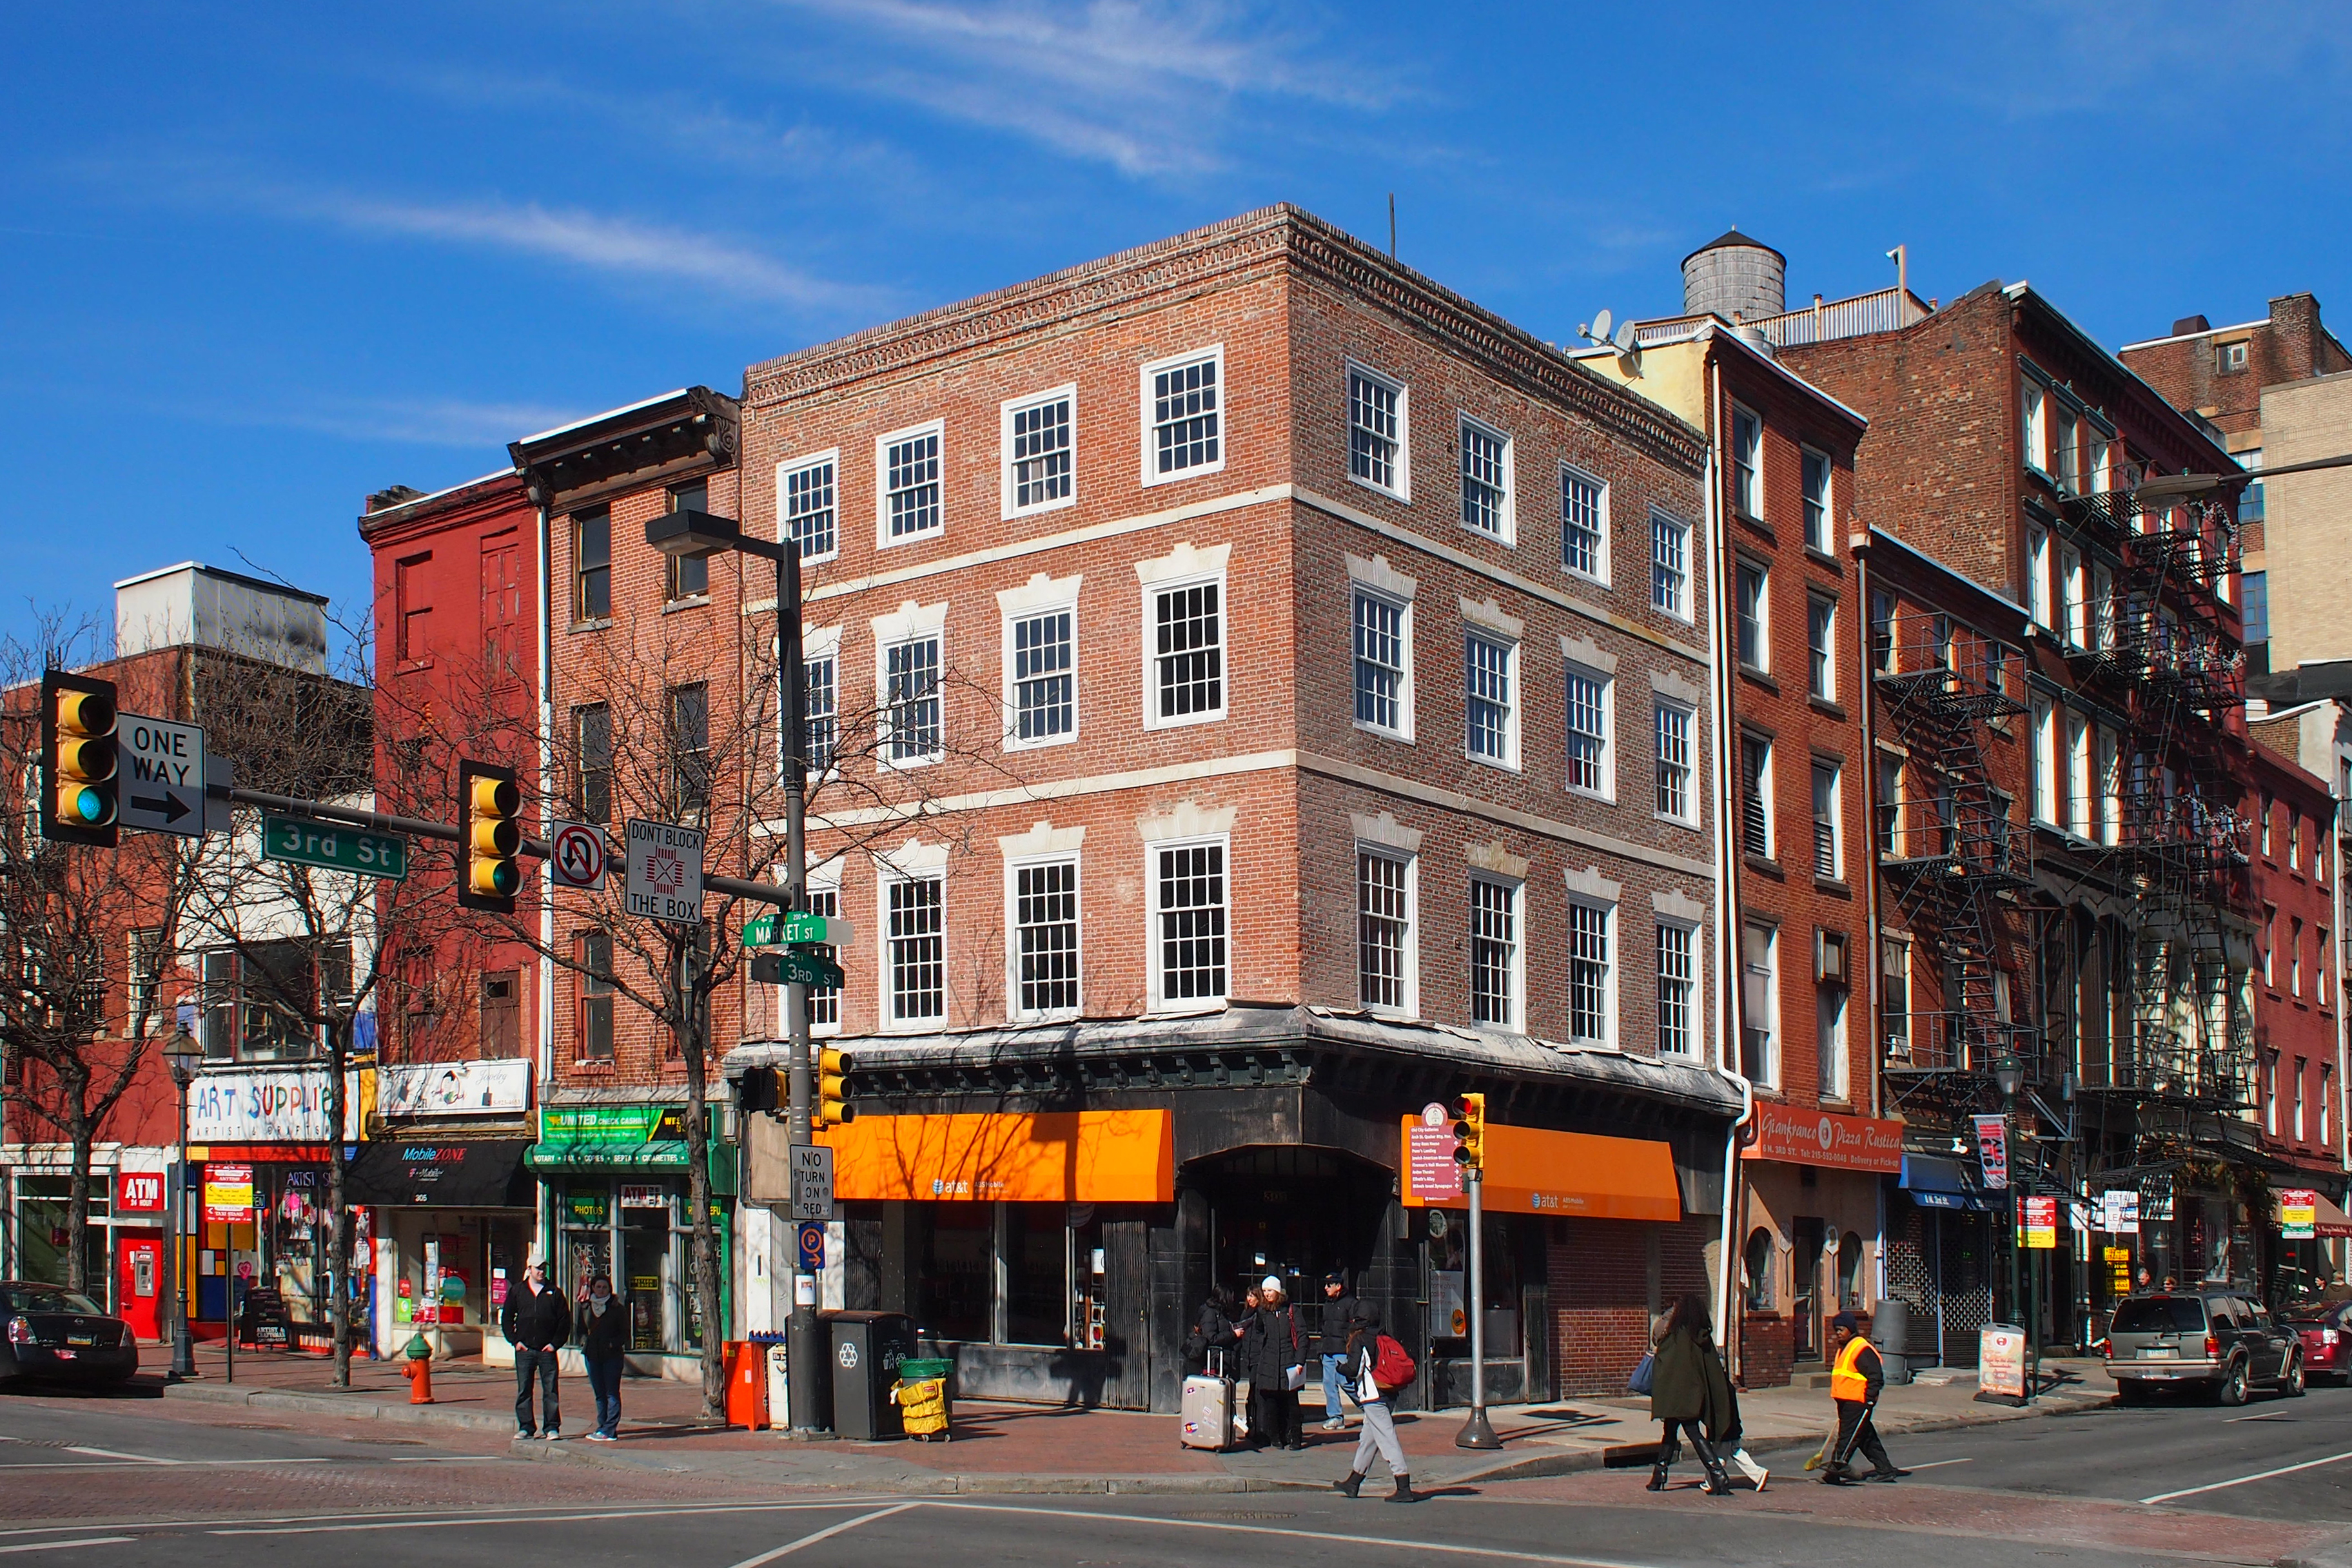 One Of City's Oldest Commercial Buildings Restored | Hidden City ...